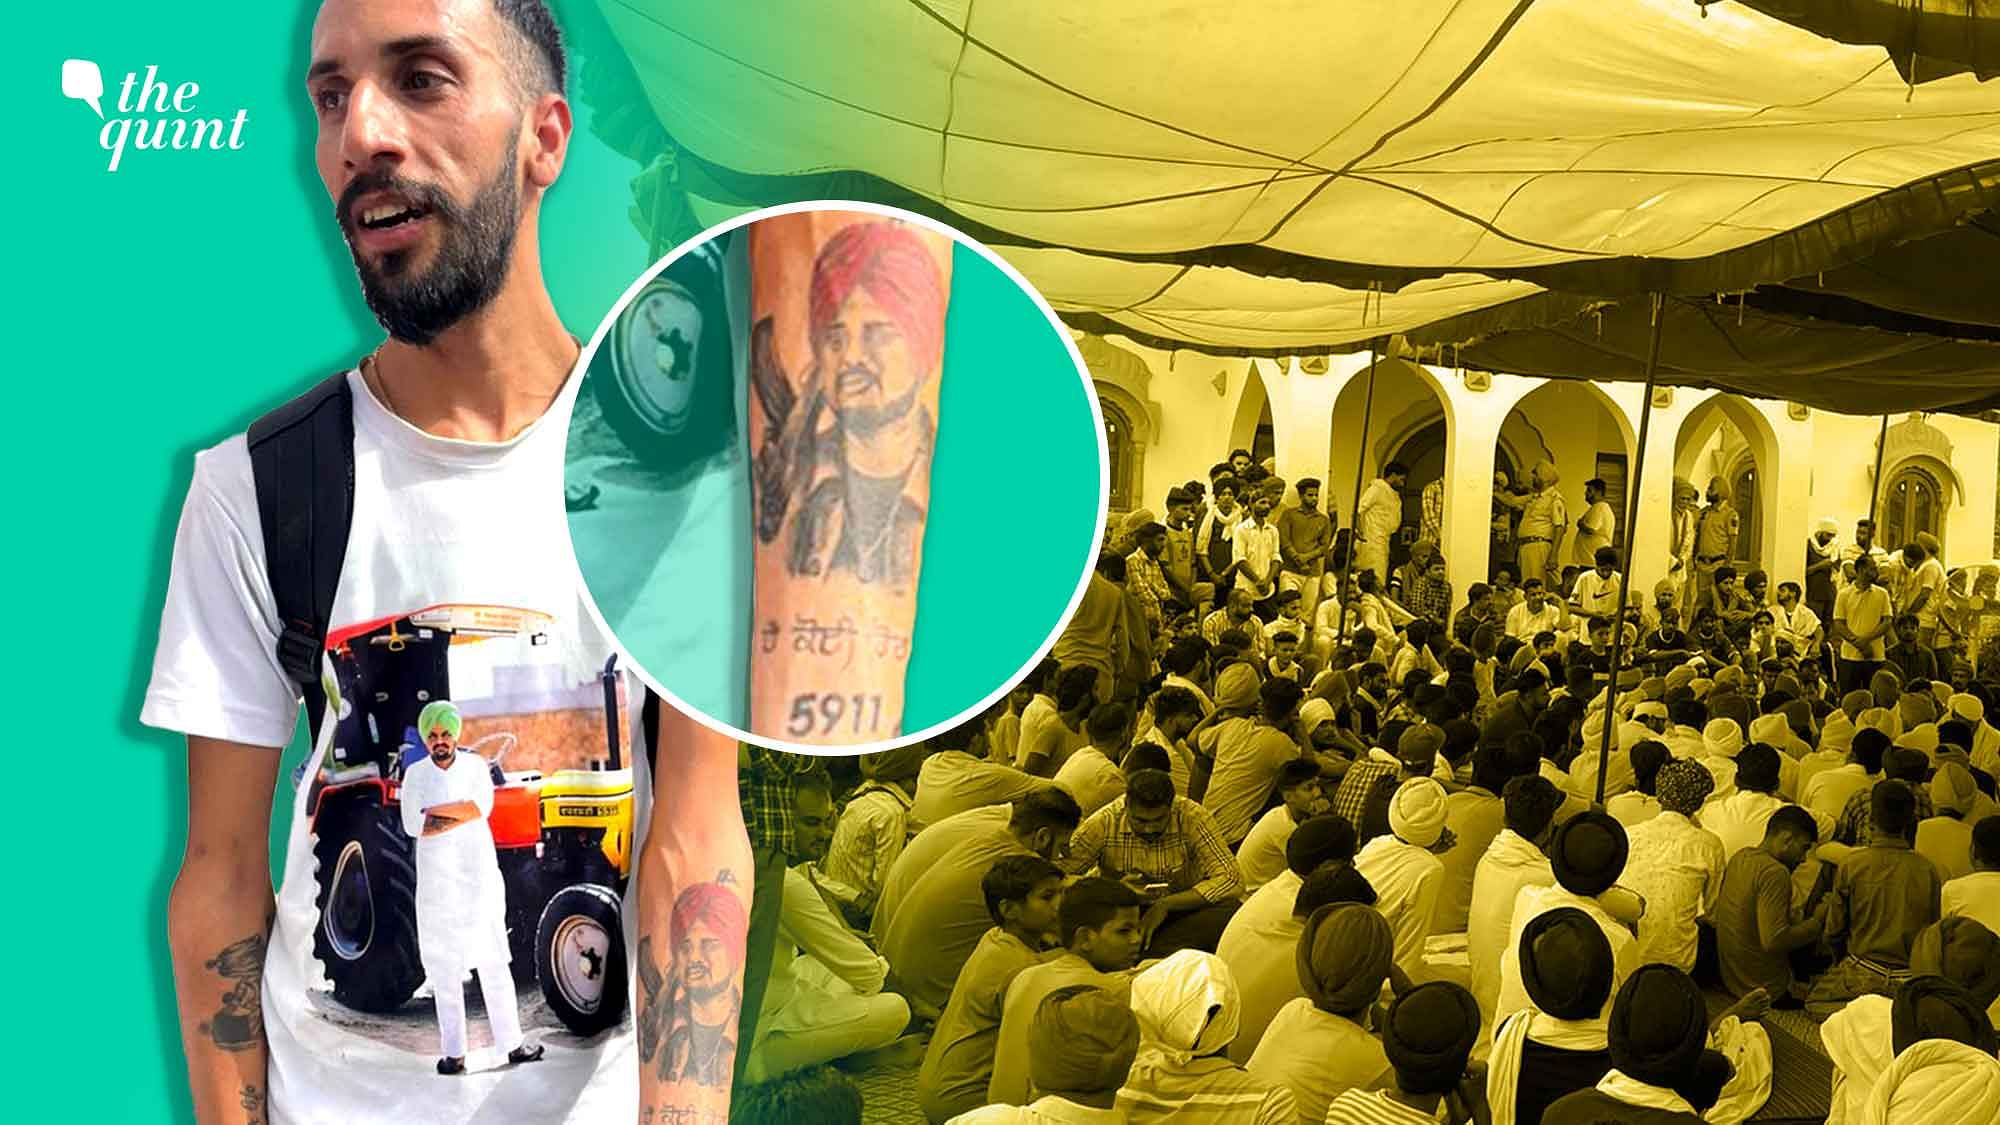 <div class="paragraphs"><p>On Gaurav's left arm is a large tattoo of singer-turned-politician&nbsp;<a href="https://www.thequint.com/news/india/law-and-order-punjab-bhagwant-mann-opposition-blames-aap-sidhu-moose-wala-killing">Sidhu Moose Wala</a>, along with the number 5911 inscribed under it.</p></div>